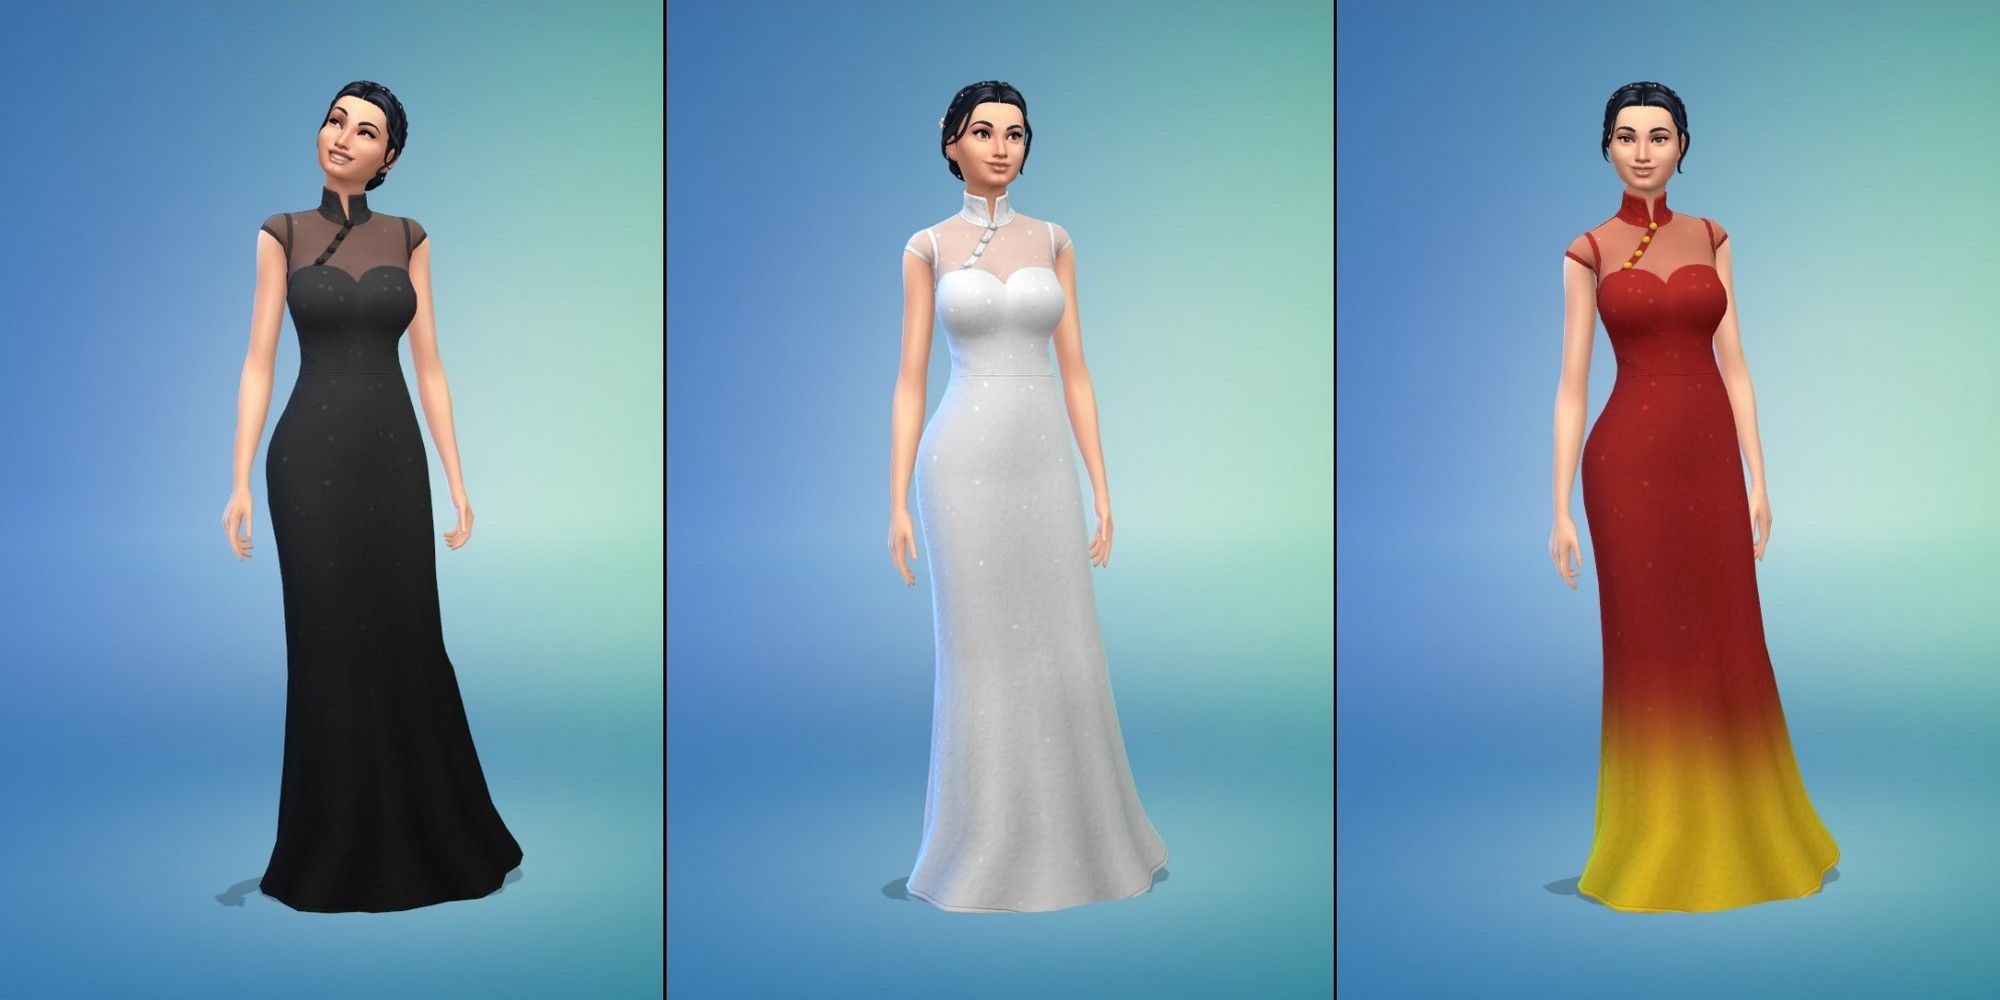 Sims 4 Wedding Dress High Neck Lace Decal